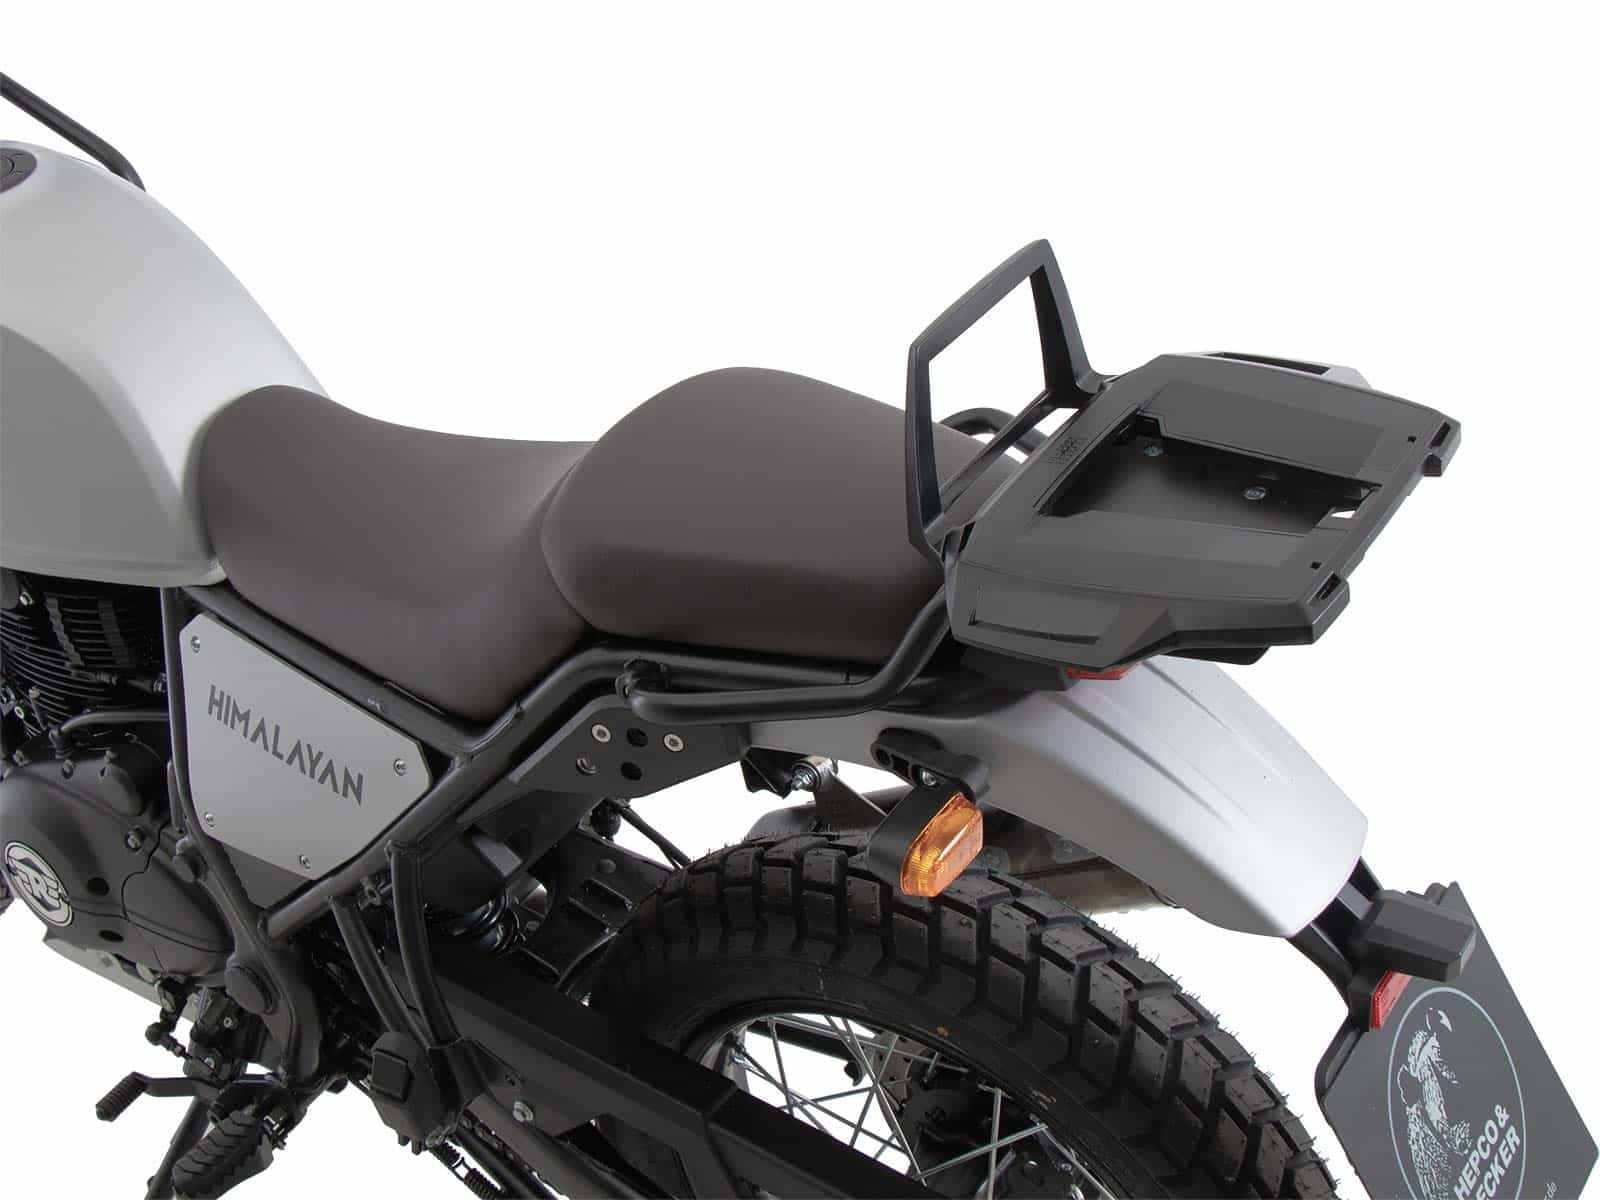 Alurack top case carrier black for combination with original rear rack for Royal Enfield Himalayan (2021-)